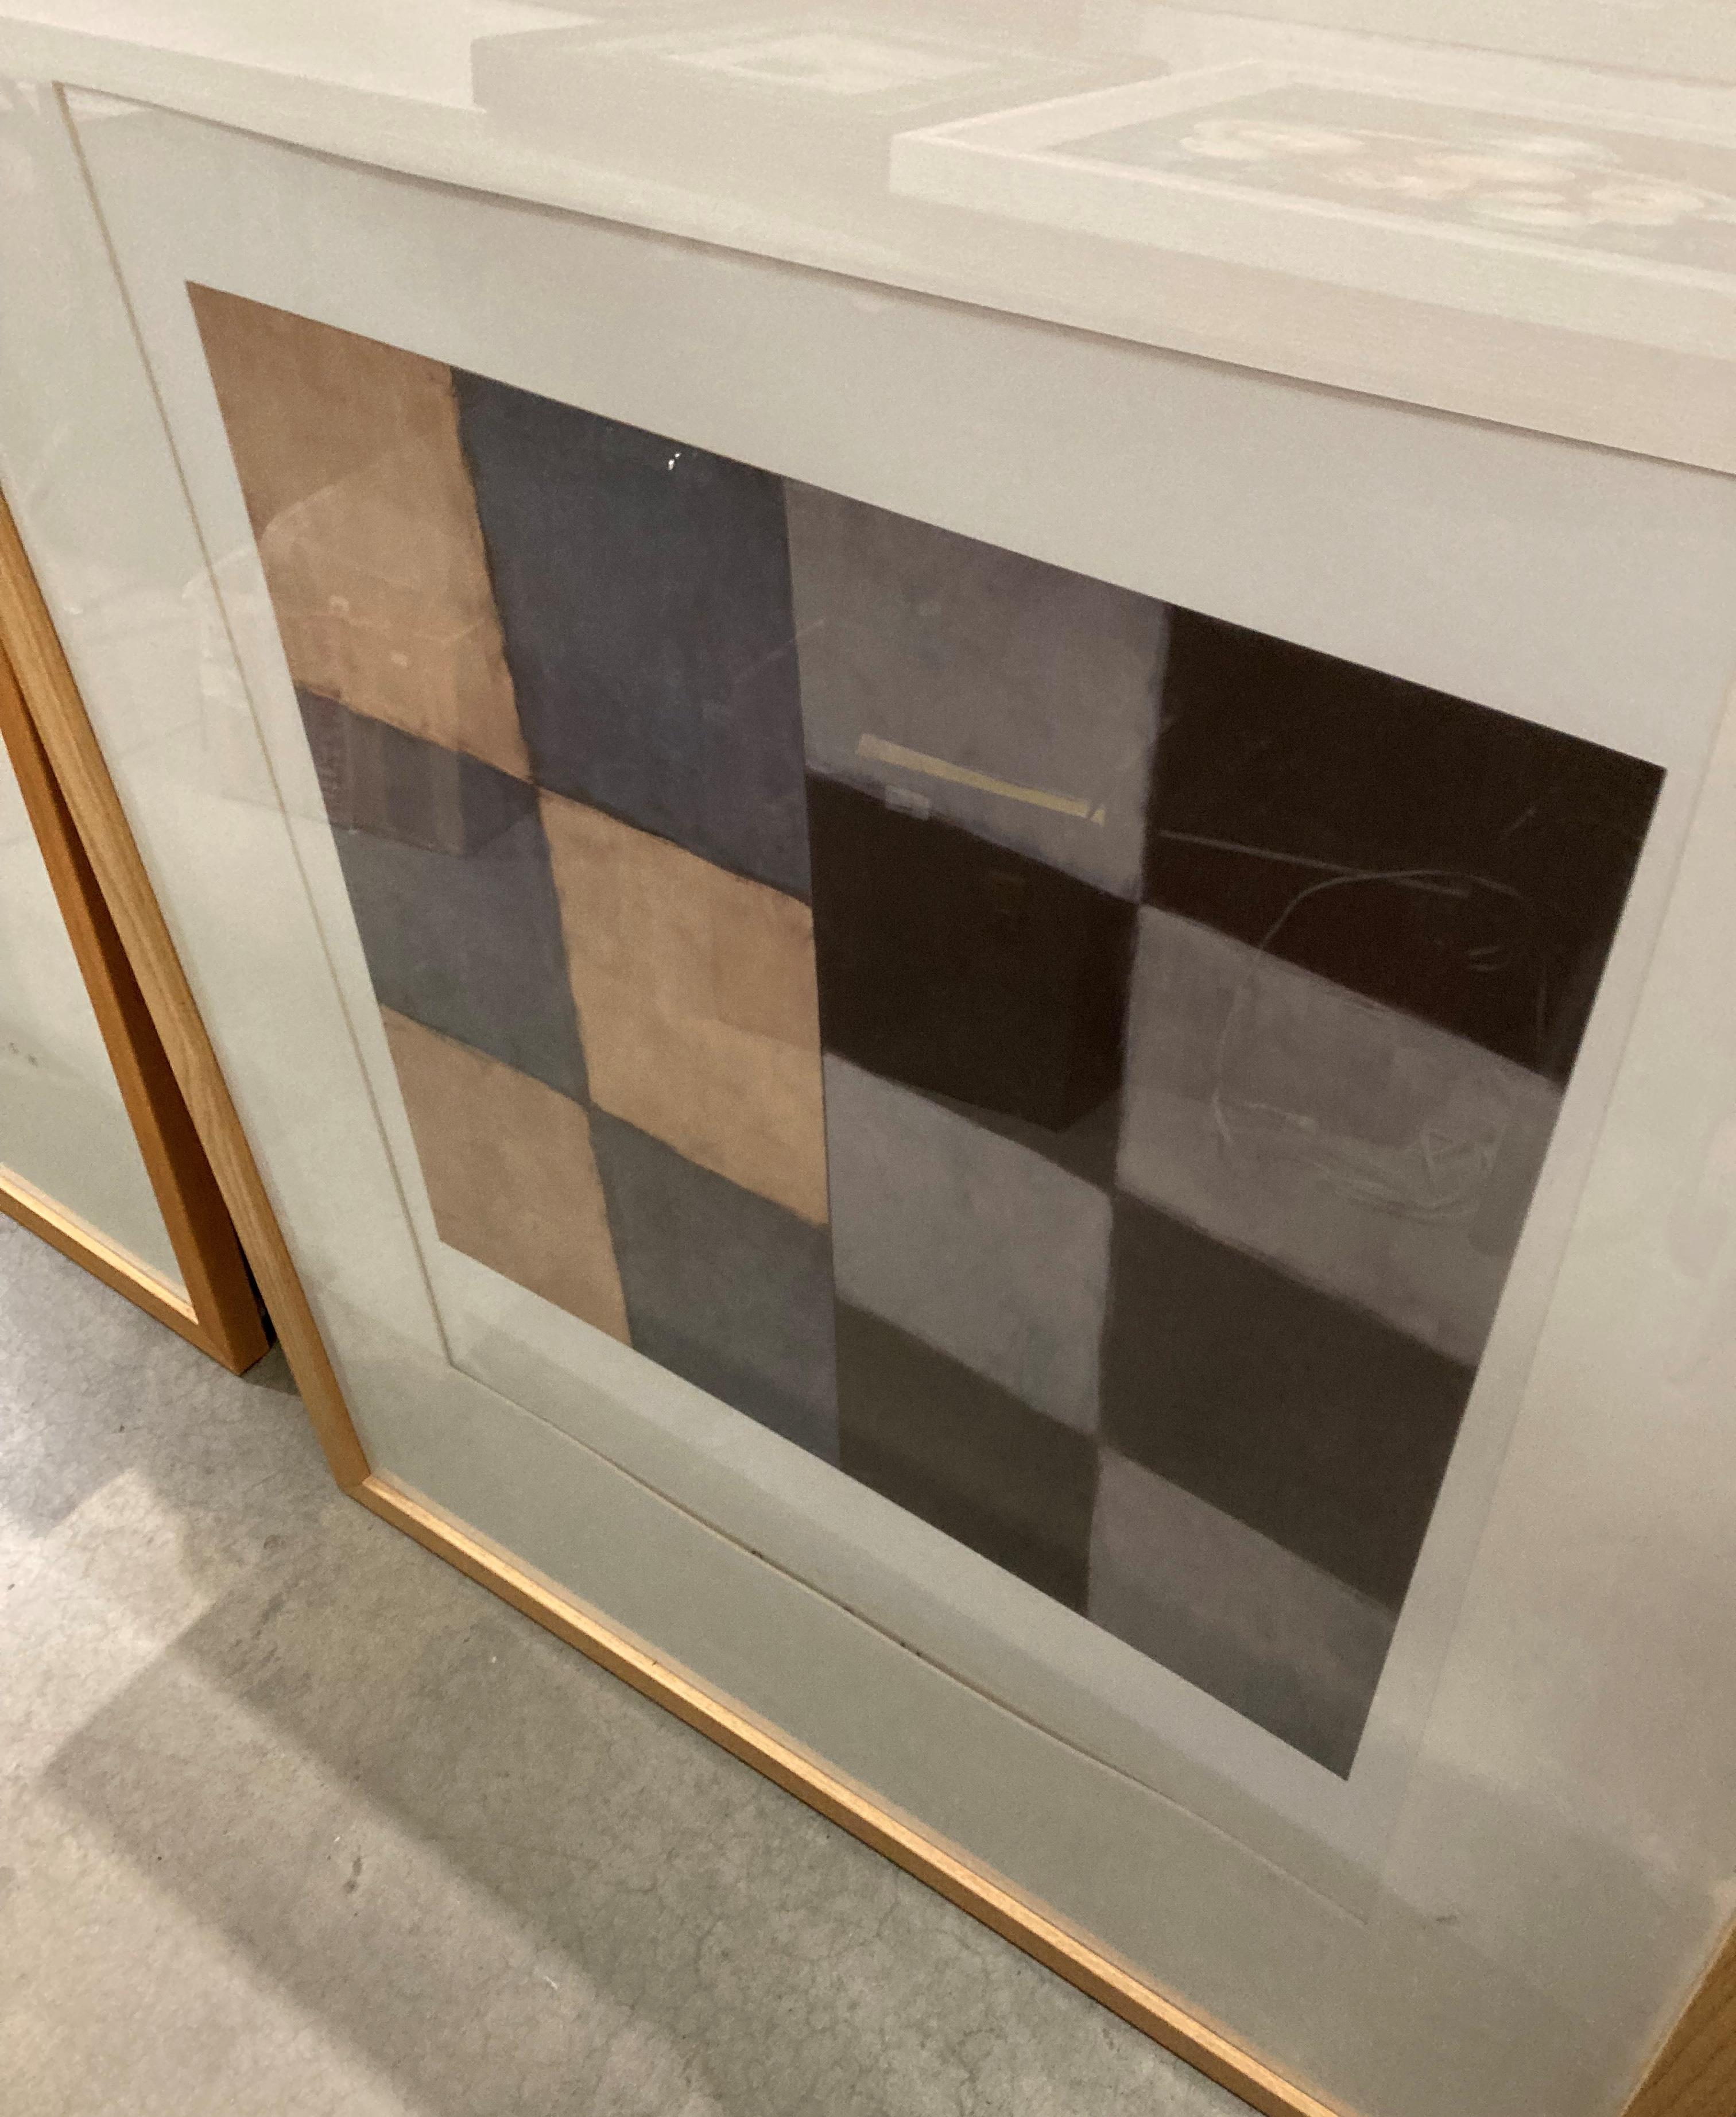 † Sean Scully, framed print 'Squares', - Image 2 of 2